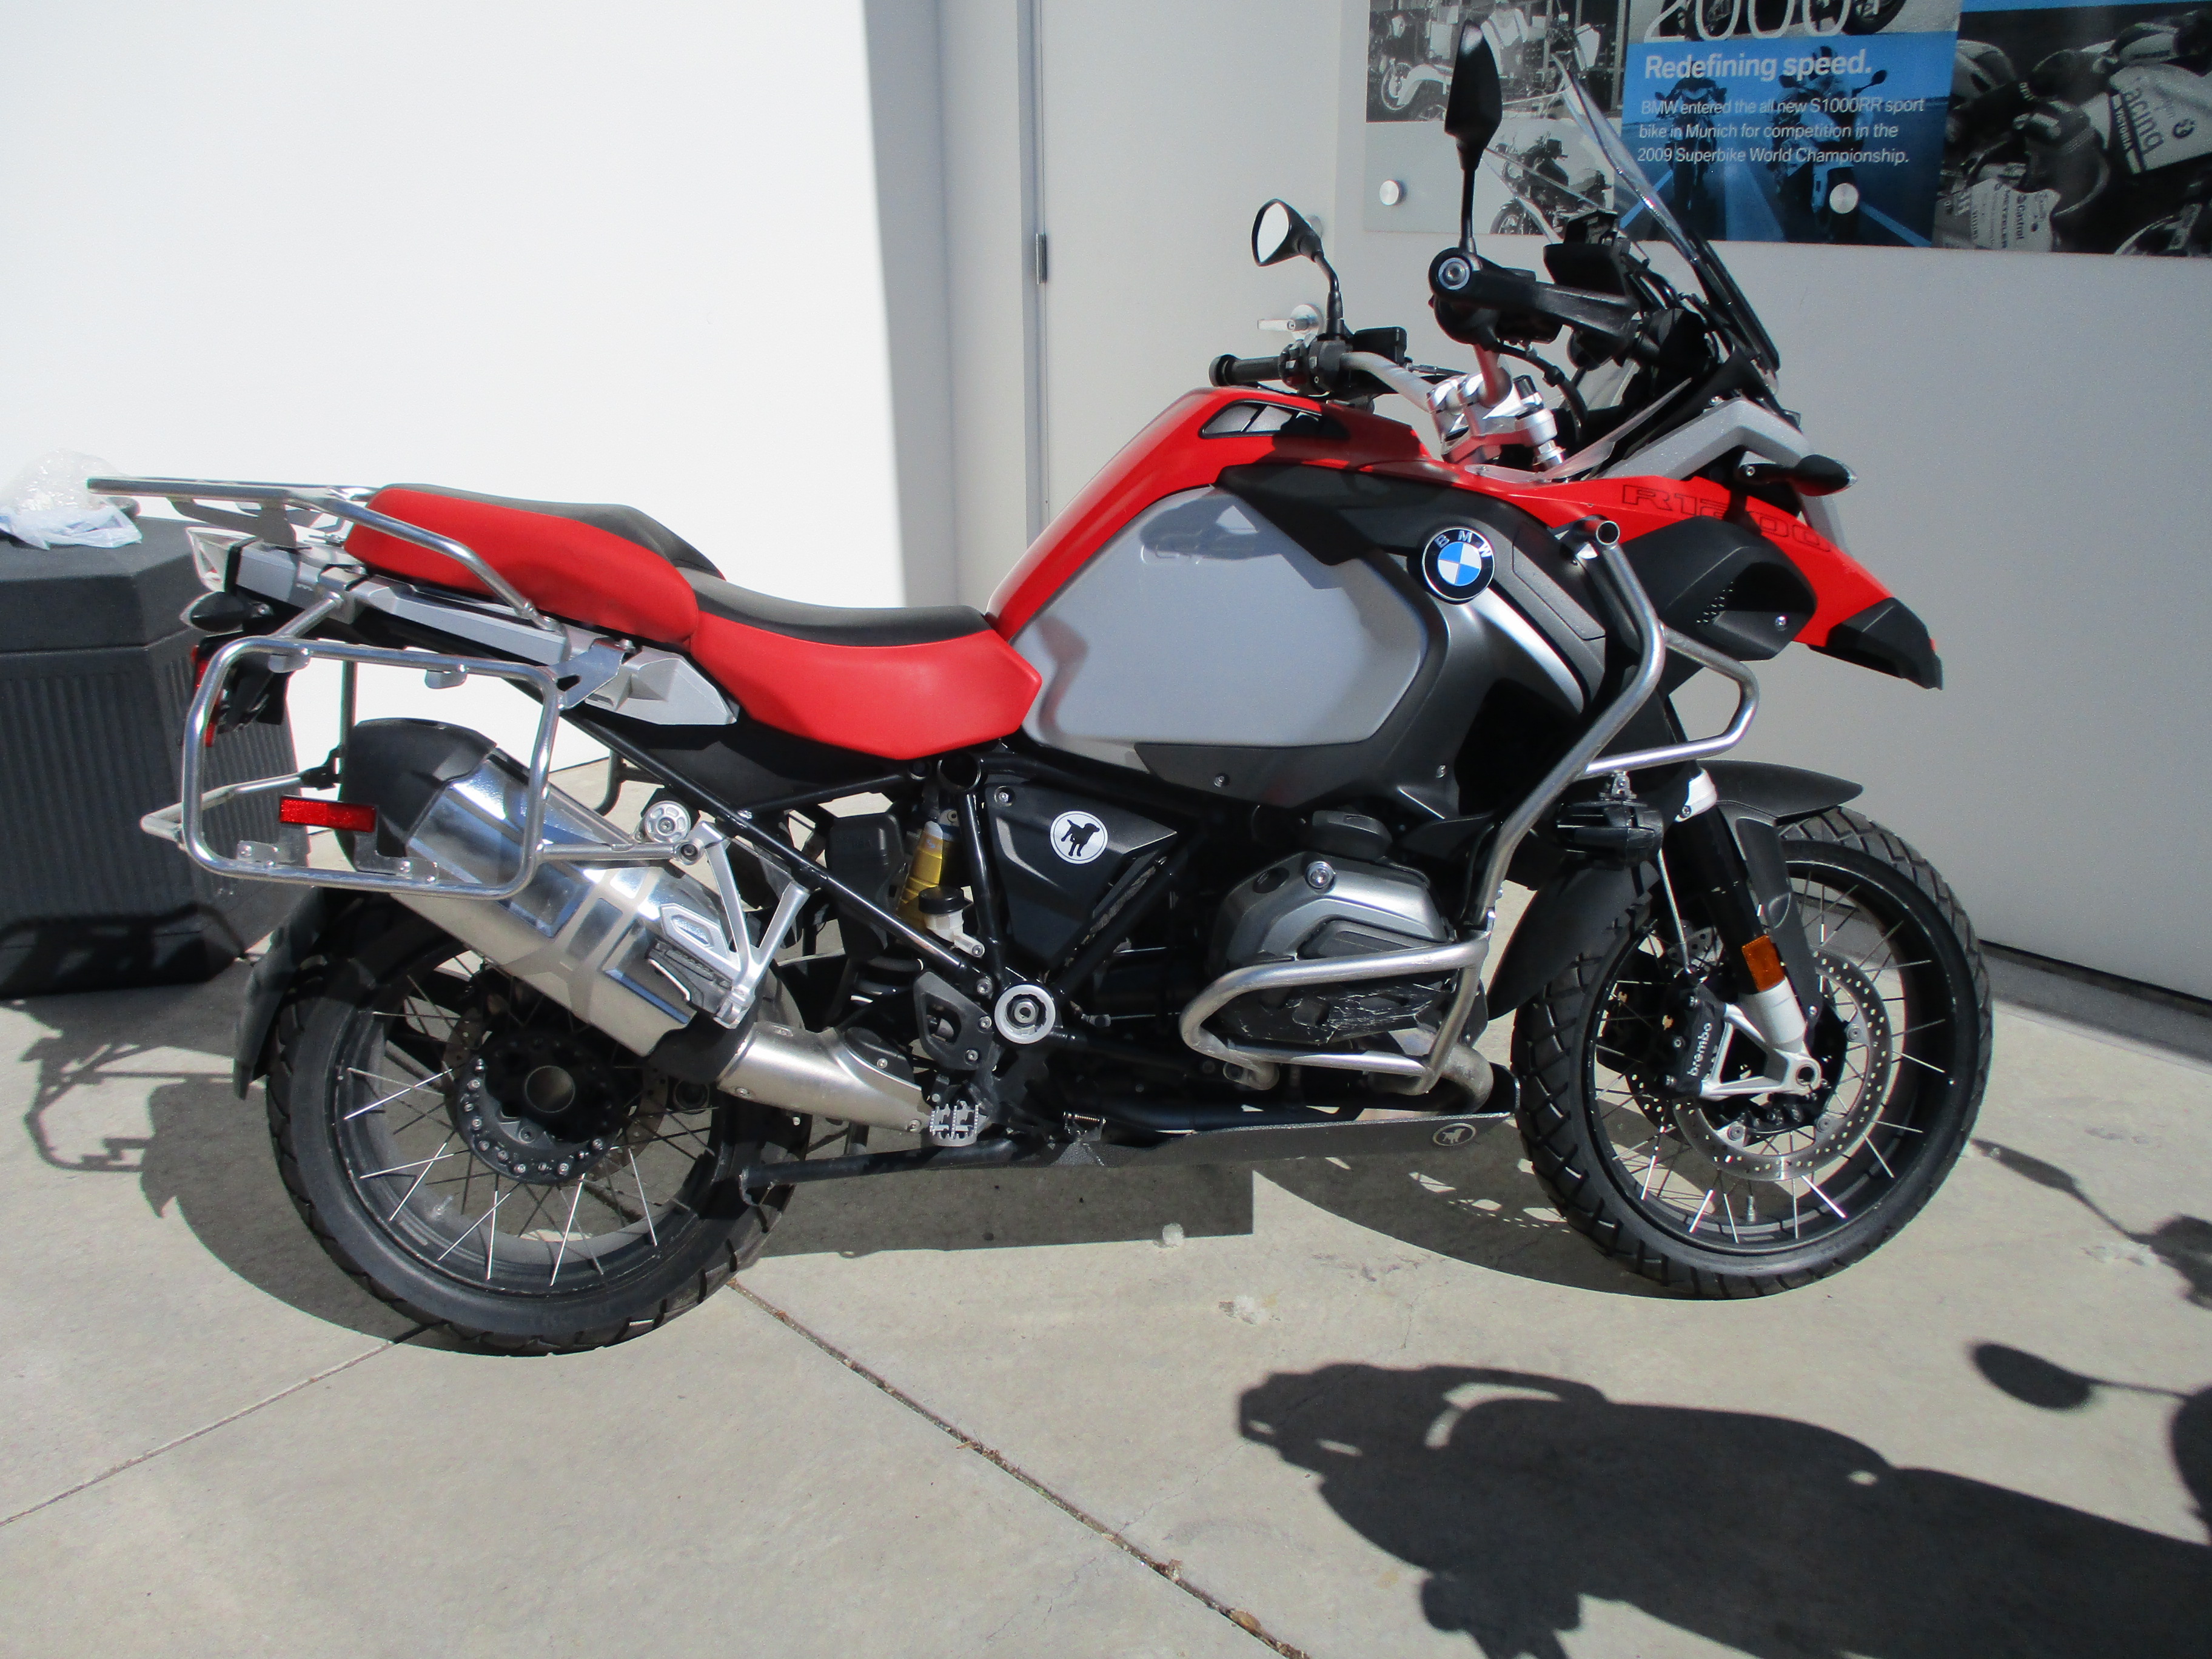 Bmw Motorcycle Dealer Albuquerque / New Motorcycle Inventory - R1250GS